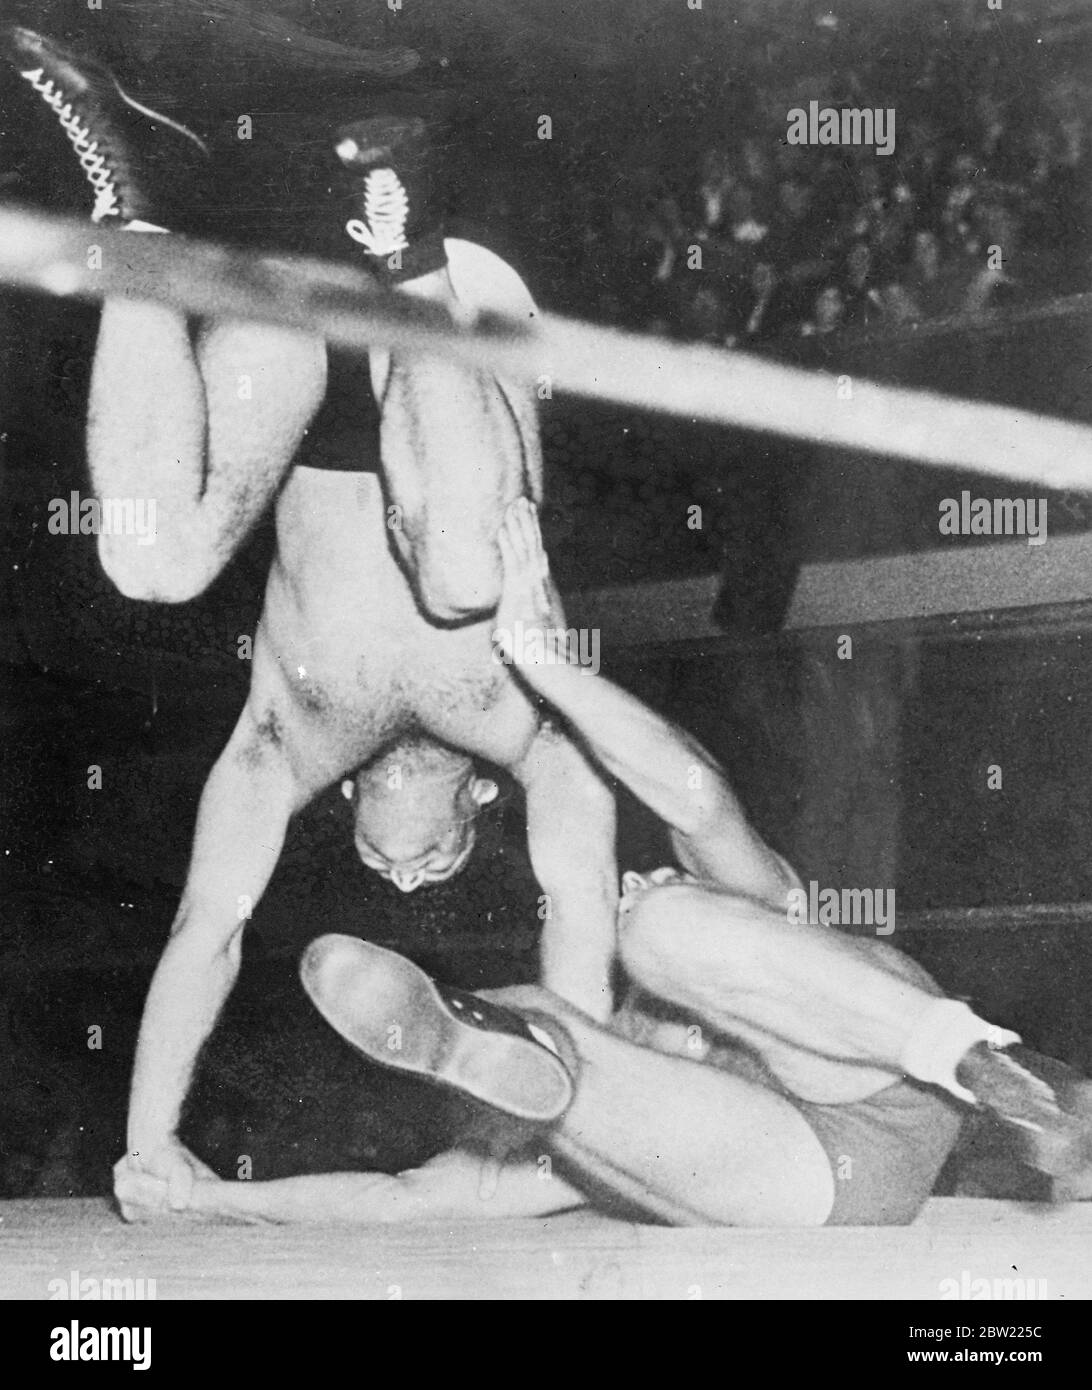 Ignacio Martinez dives head first at the prostrate Pat Meehan during their wresting bout at the coliseum in Los Angeles Califronia. 7 October 1937.[?] Stock Photo